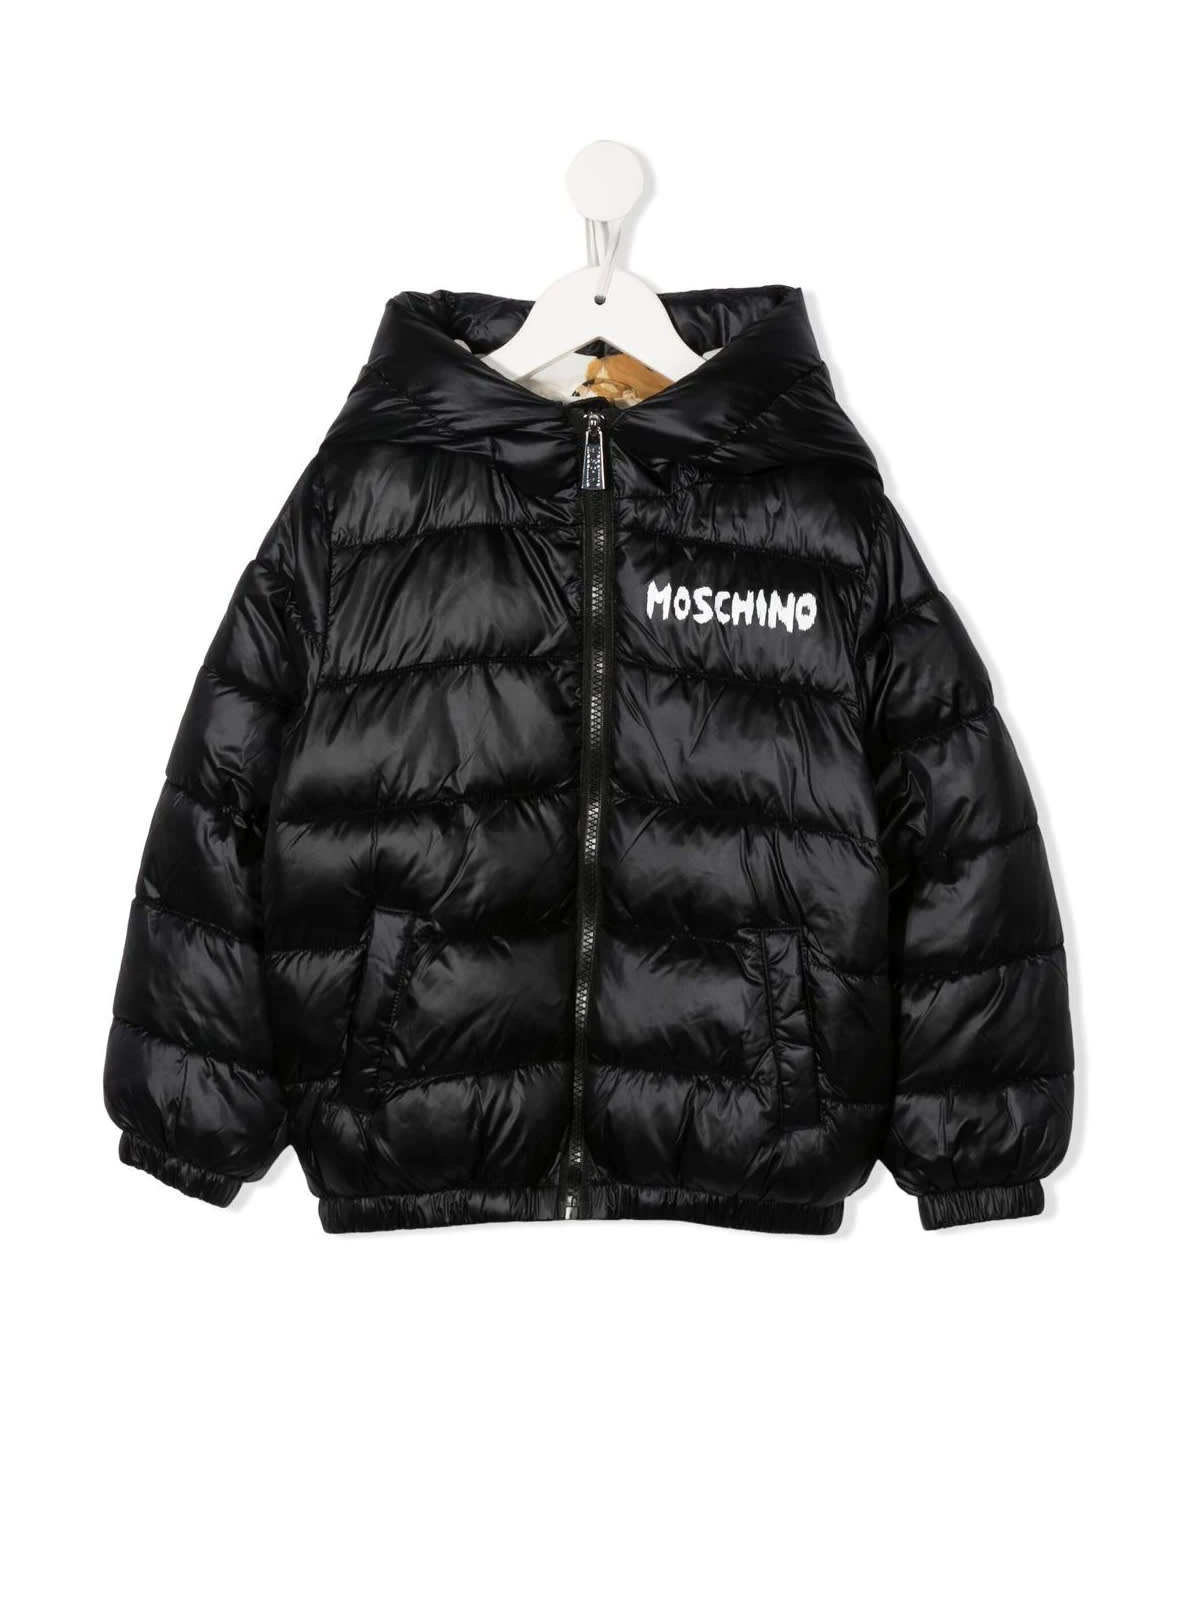 Moschino Padded Jacket With Print